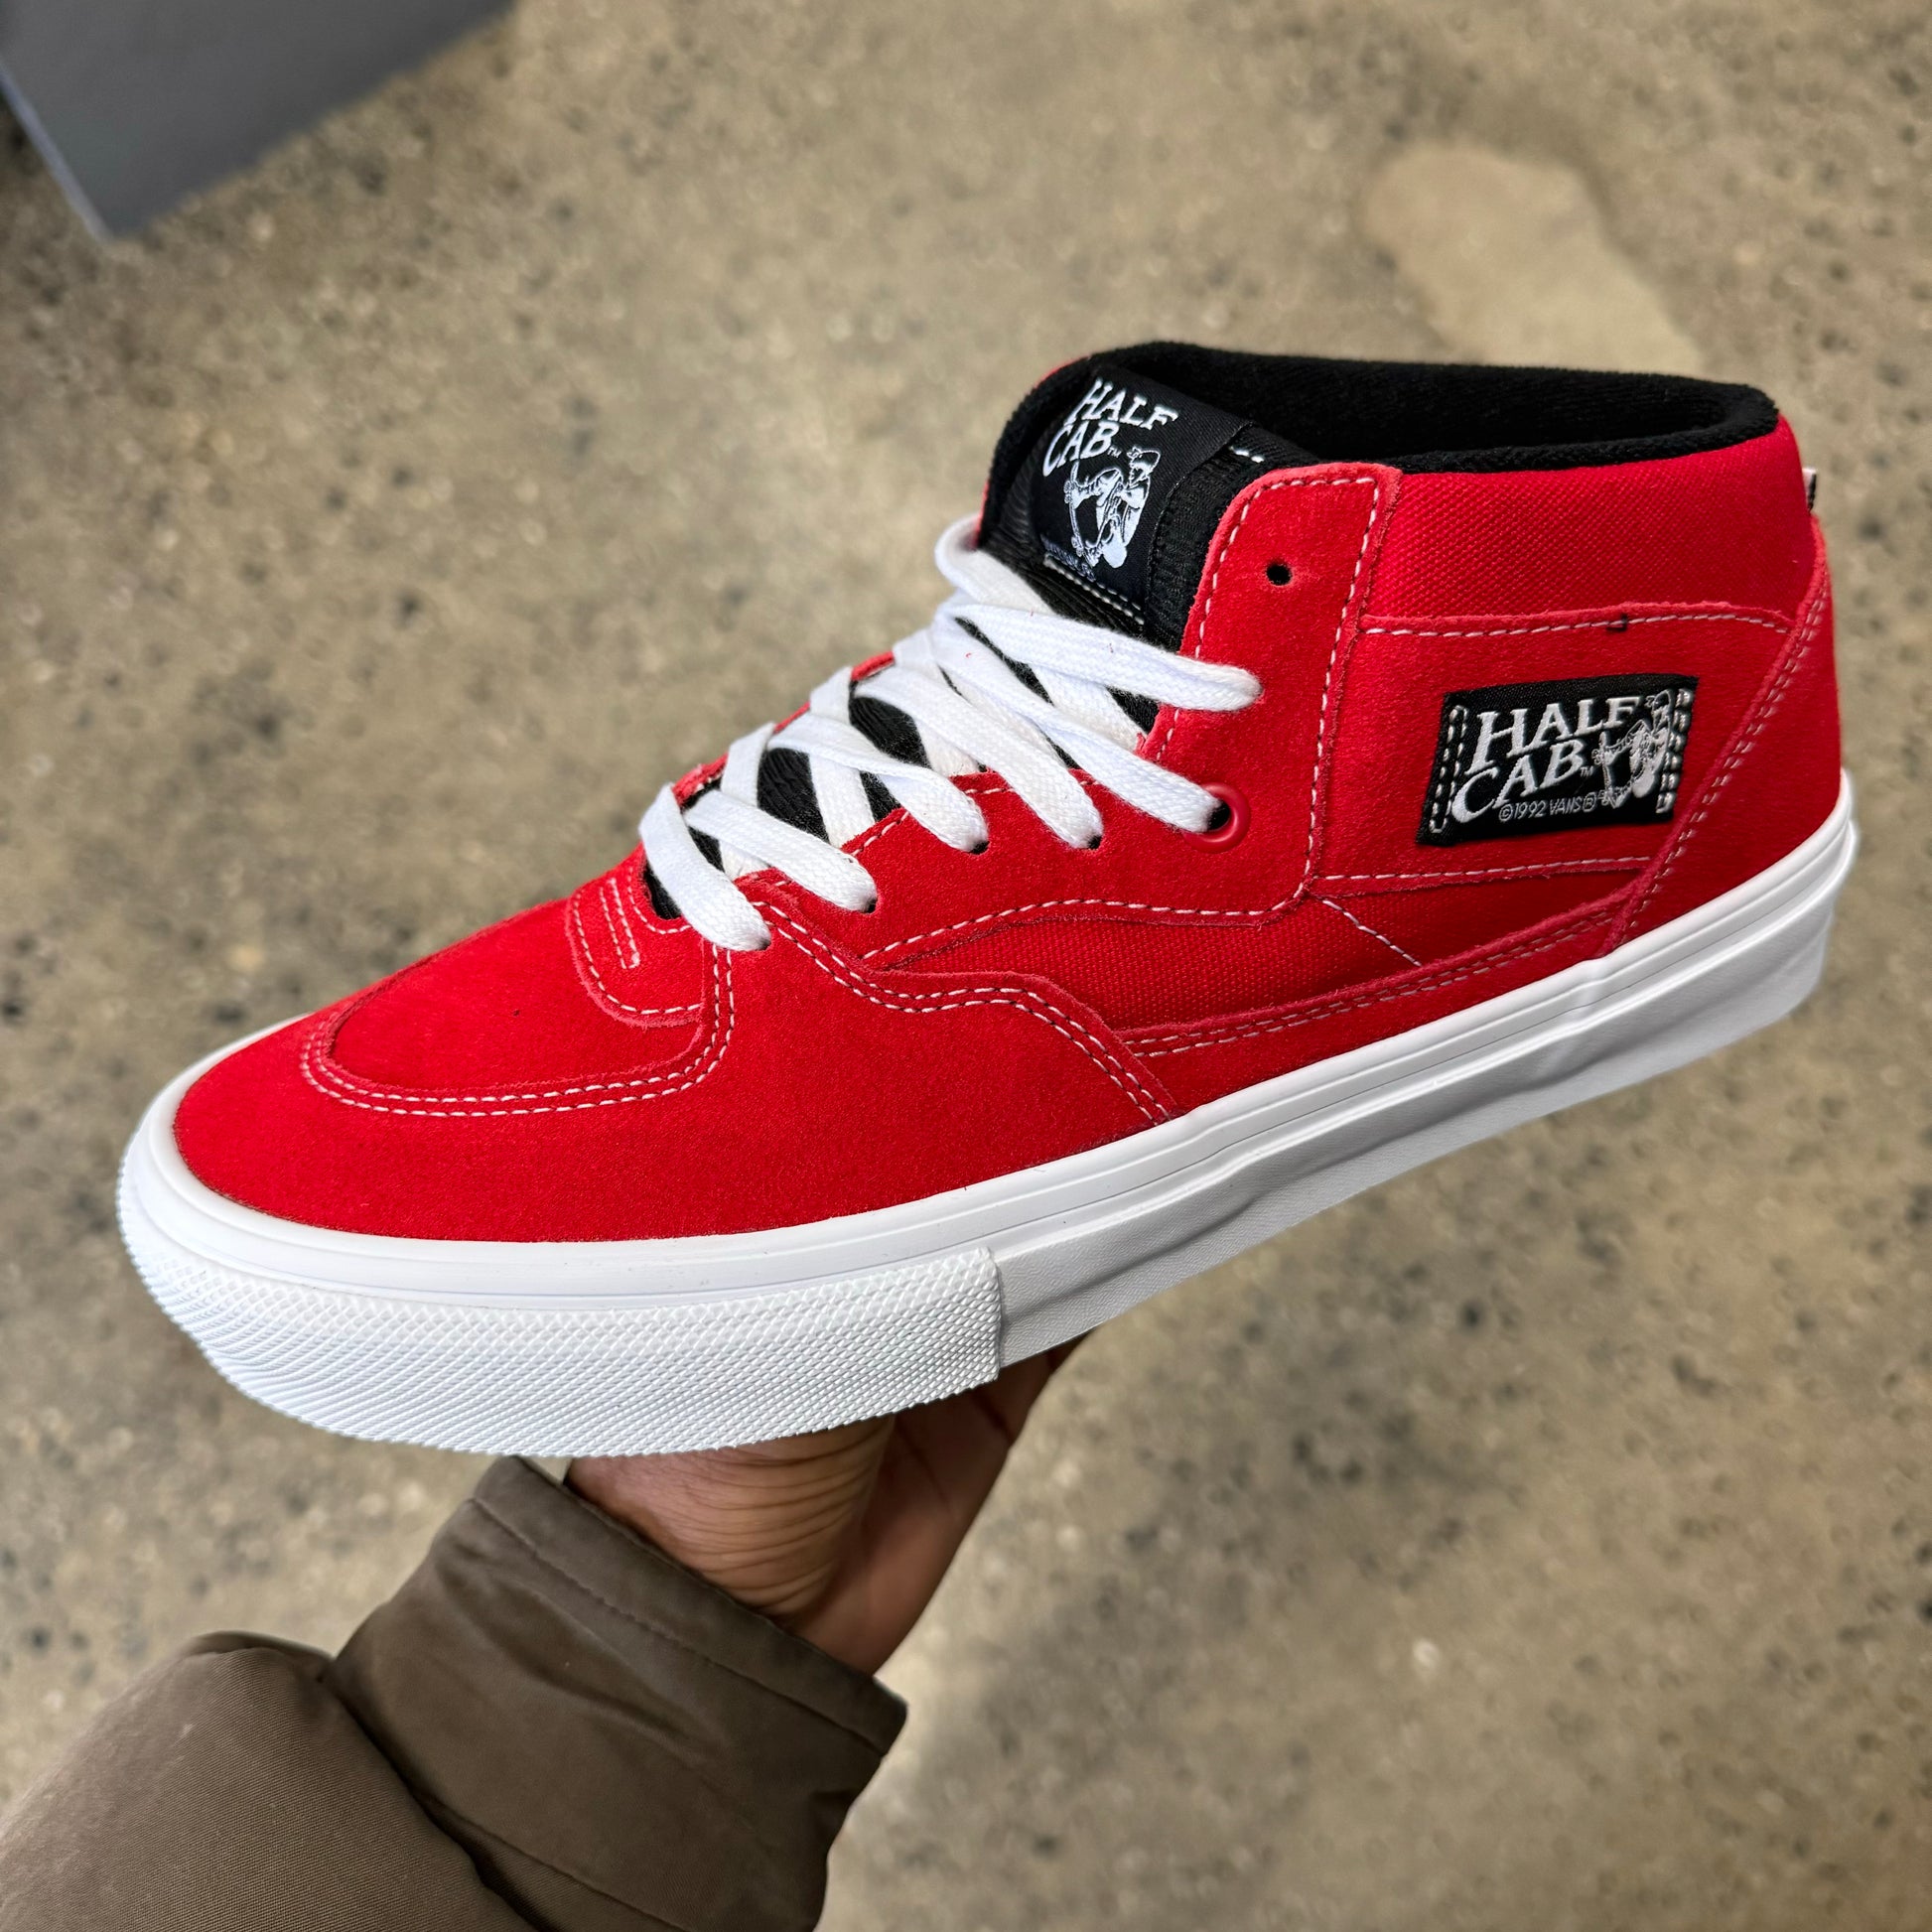 Red suede and canvas mid top skateboard shoe with black tounge, and white outsole